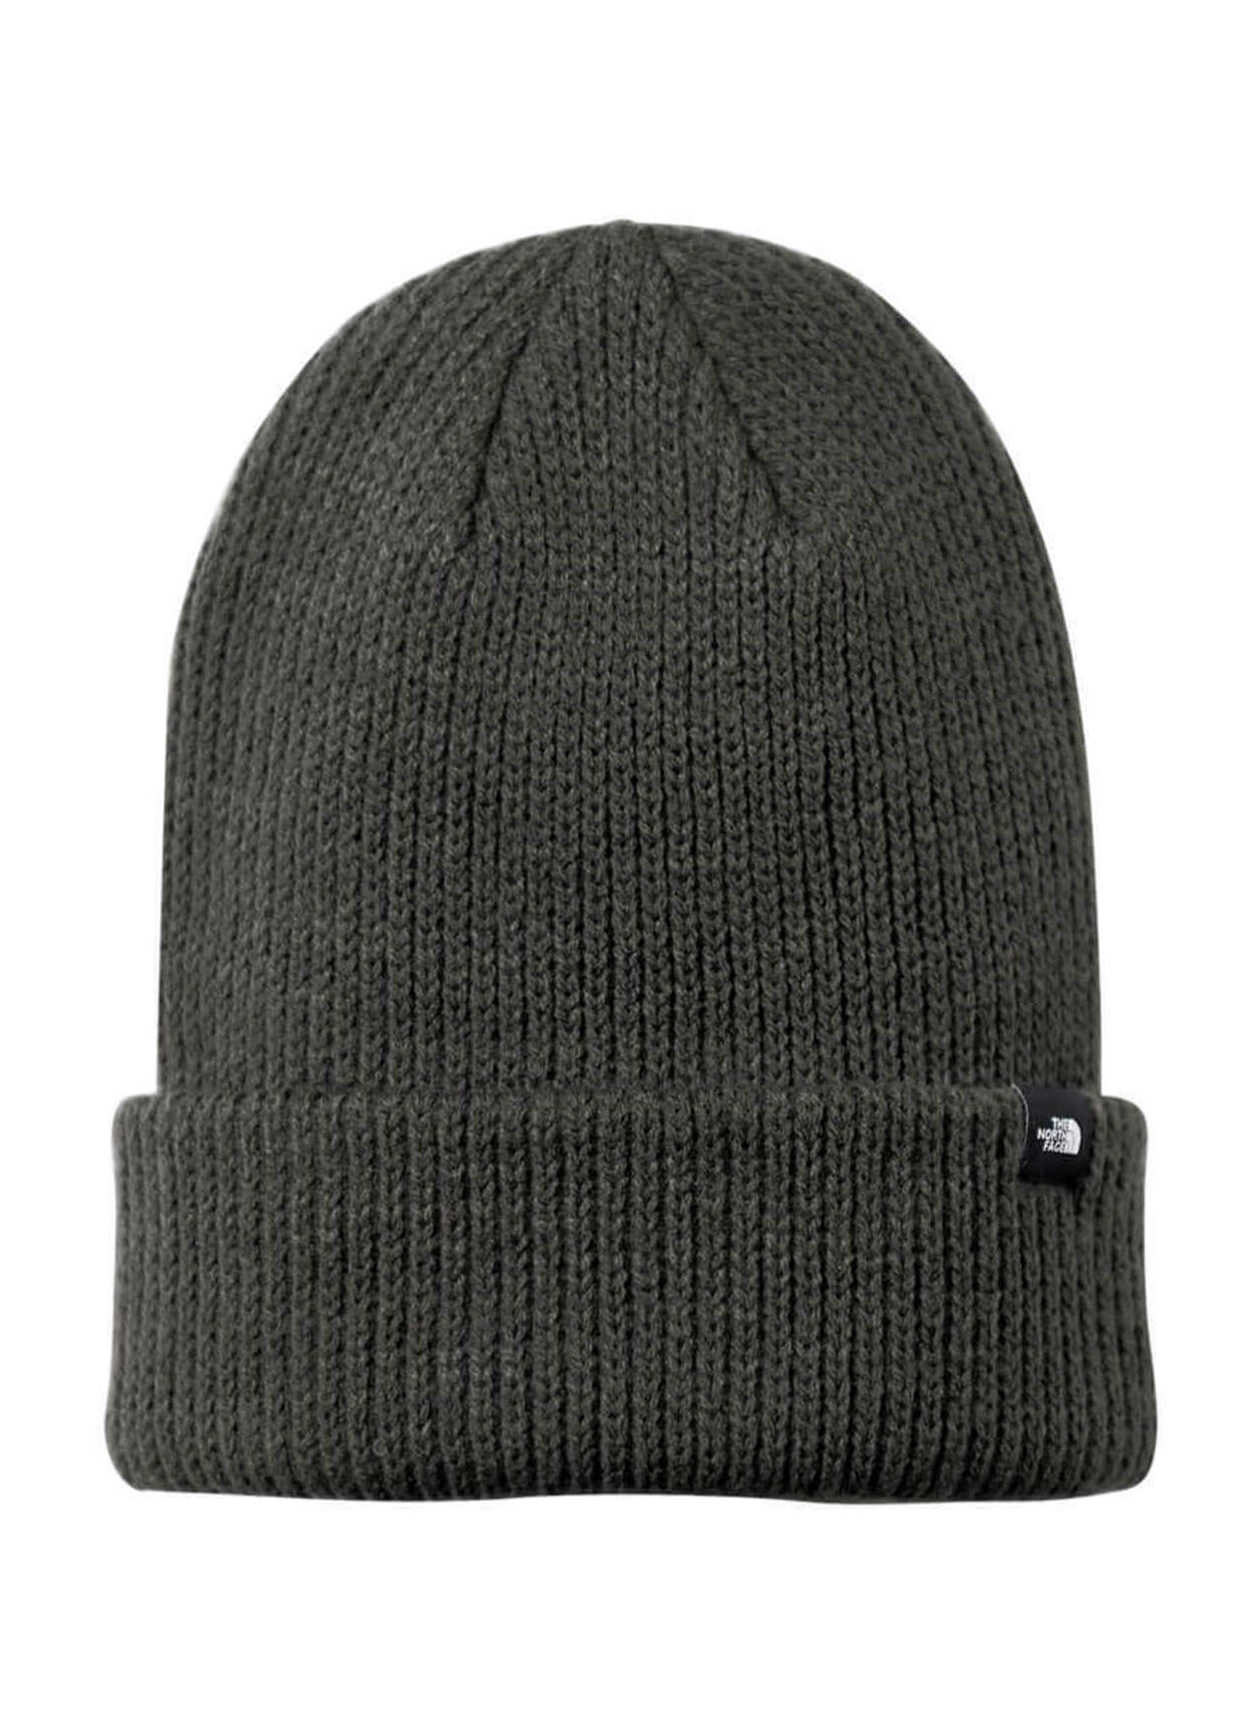 The Grey North The Beanie Face Asphalt North | Truckstop Face